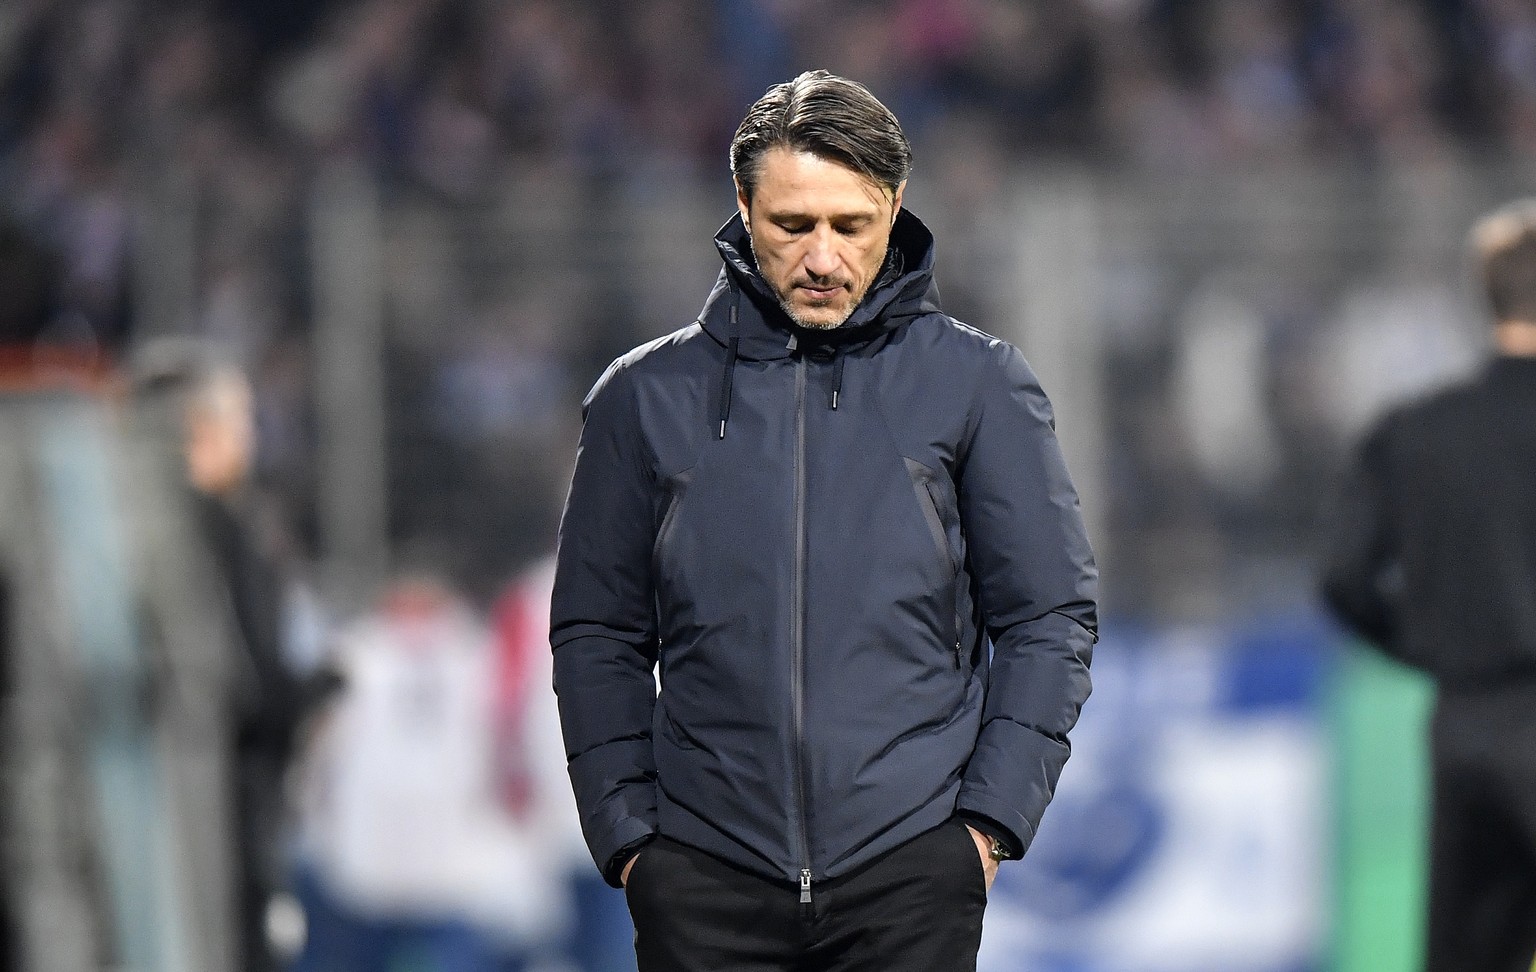 FILE - In this Oct. 29, 2019 file photo, Bayern&#039;s head coach Niko Kovac looks down during the German soccer cup, DFB Pokal, second Round match between VfL Bochum and Bayern Munich in Bochum, Germ ...